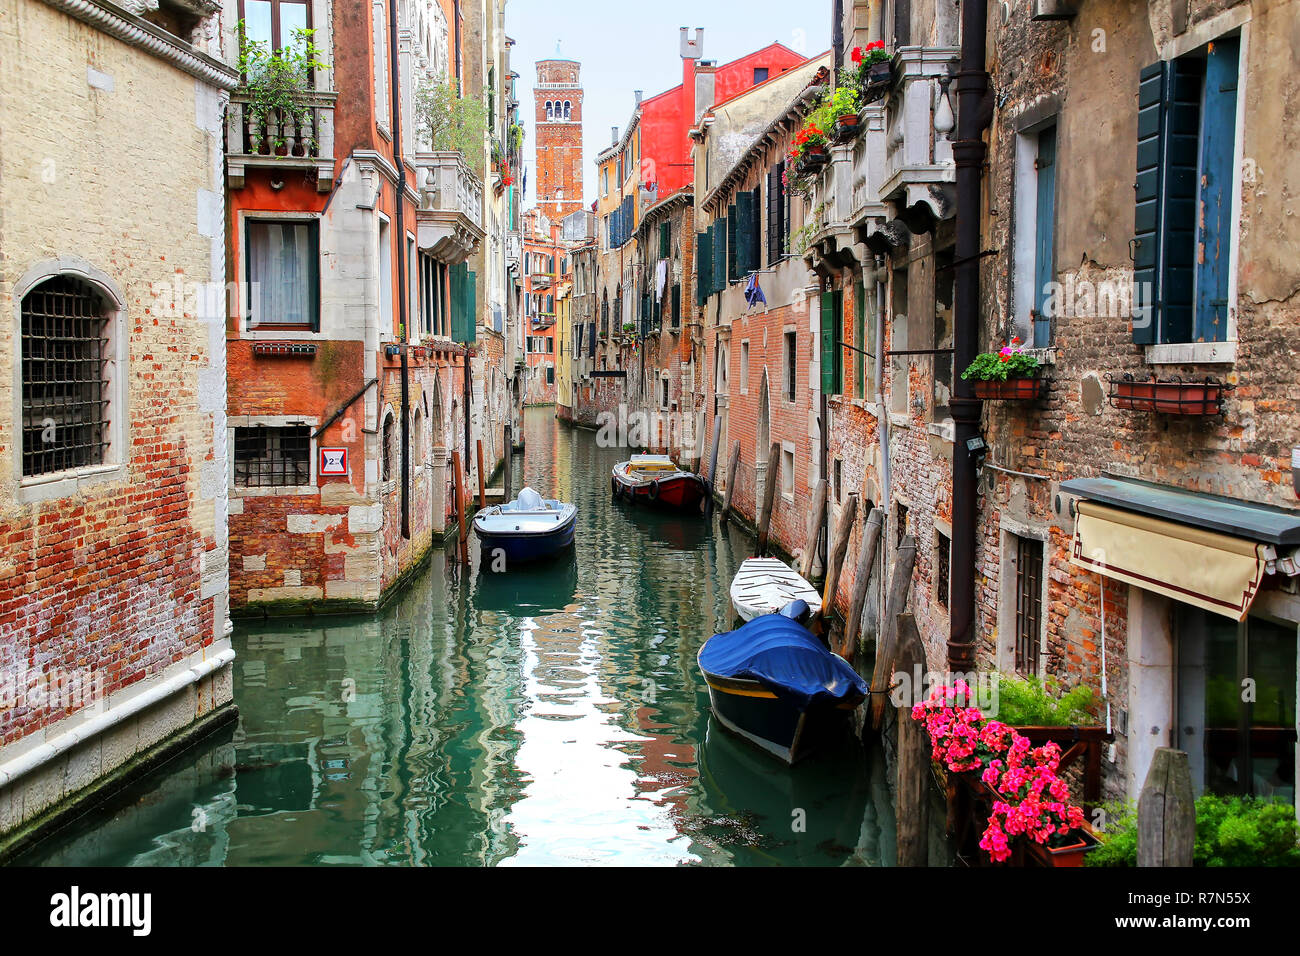 Houses and boats along narrow canal in Venice, Italy. Venice is situated across a group of 117 small islands that are separated by canals and linked b Stock Photo